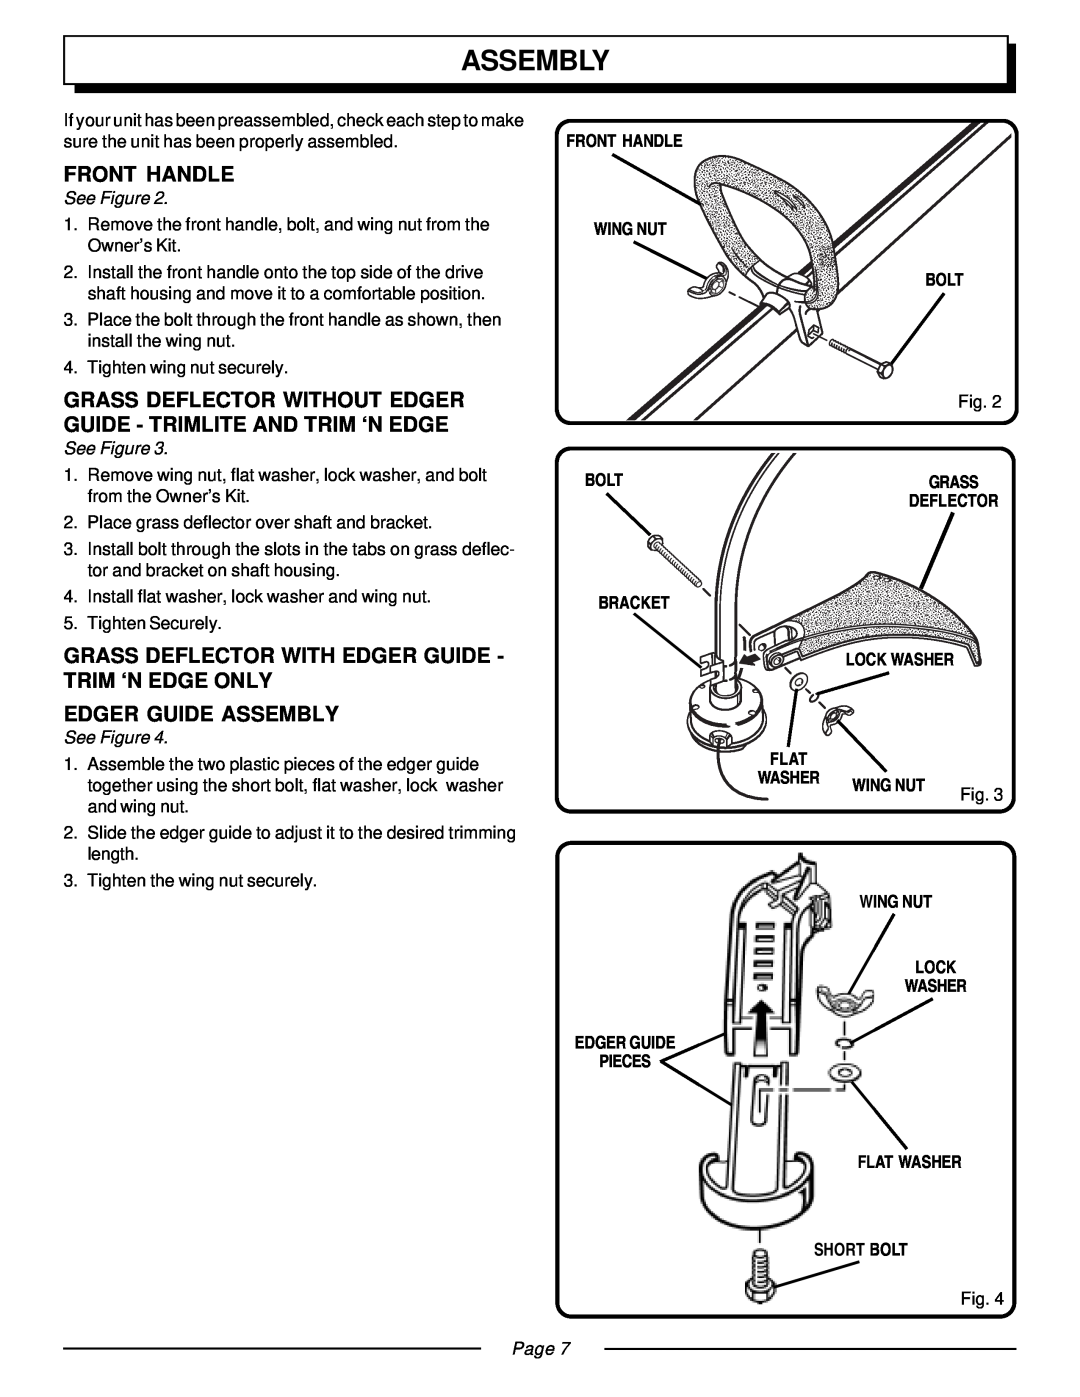 Homelite UT20933, UT20930 manual Front Handle, Edger Guide Assembly, See Figure, Wing Nut Bolt Bracket, Pieces, Page 